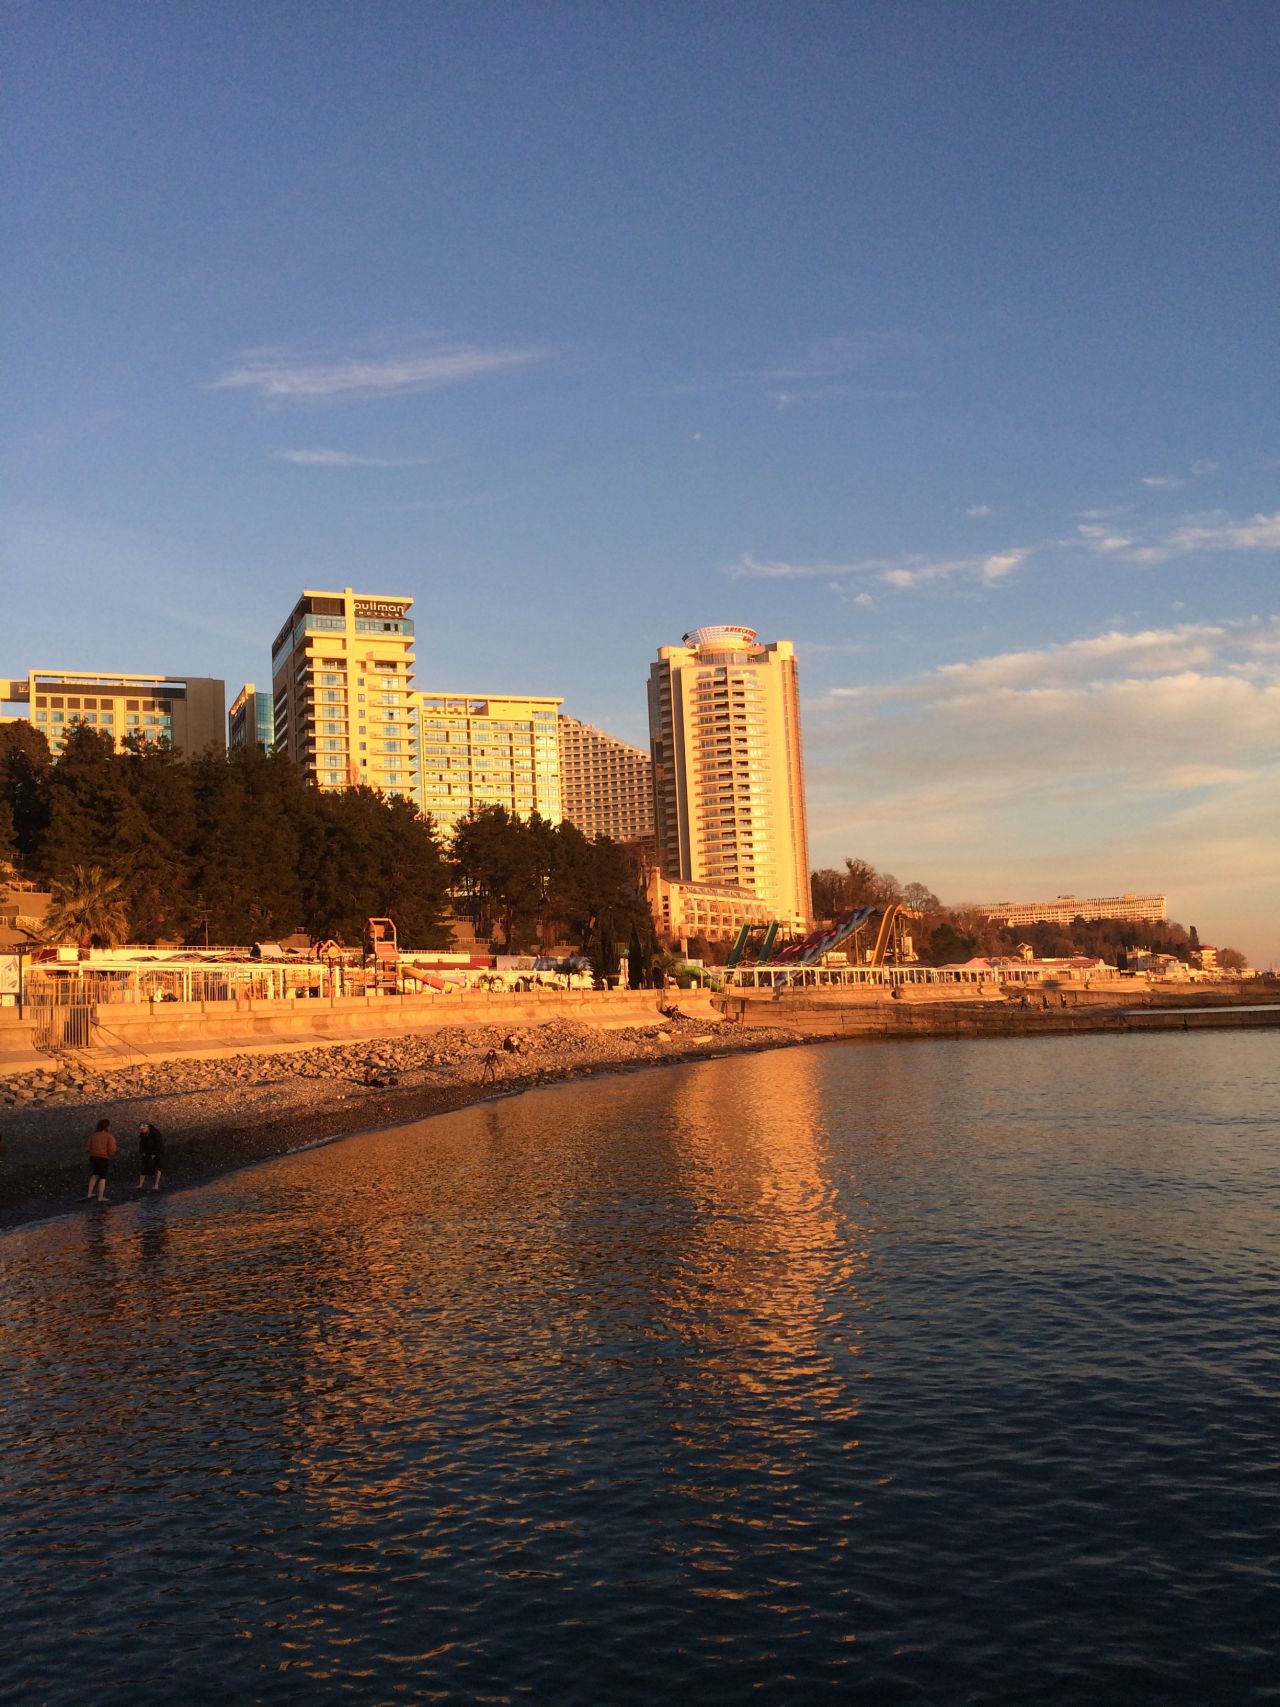 In 1909 the first hotel, Riviera, was built on the Sochi shore. The Soviets later developed the resort for working people. 